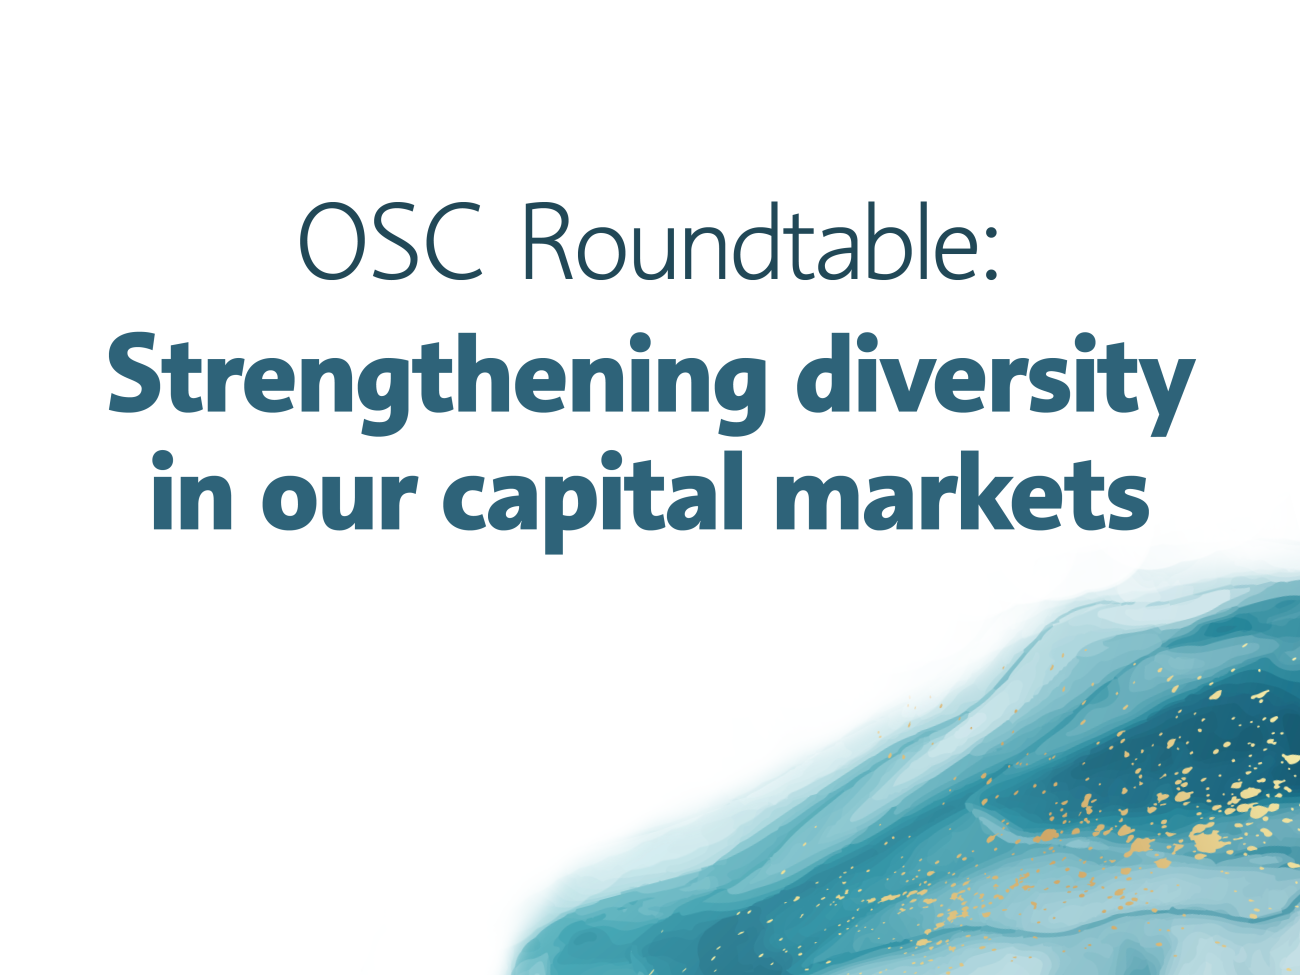 OSC Roundtable: Strengthening diversity in our capital markets